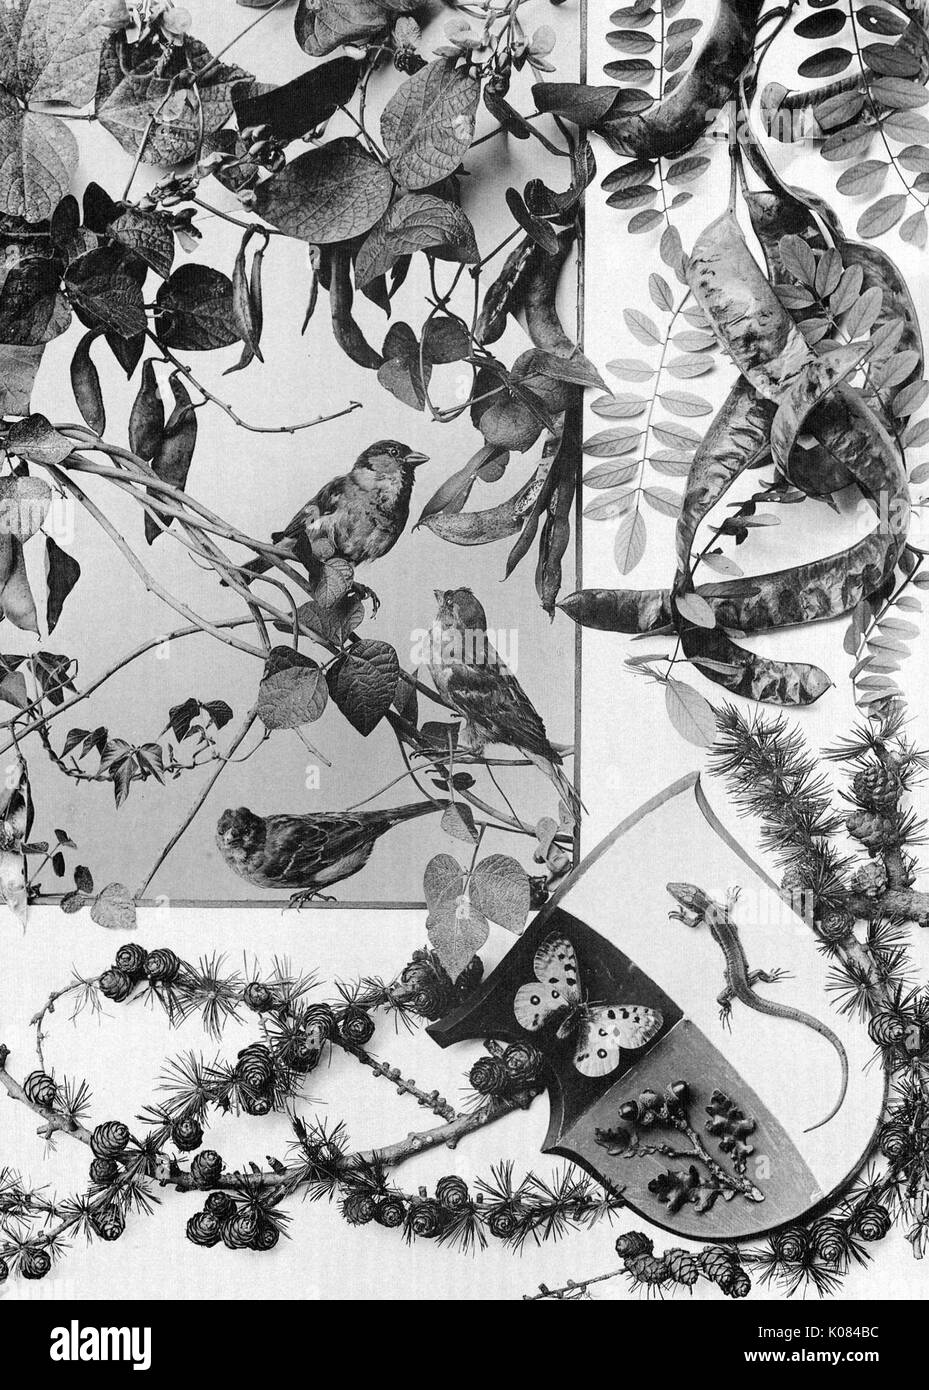 Floral design with variety of plants and animals such as birds and a lizard, coat of arms with butterfly, plant and big i in this chat, 1900. Stock Photo